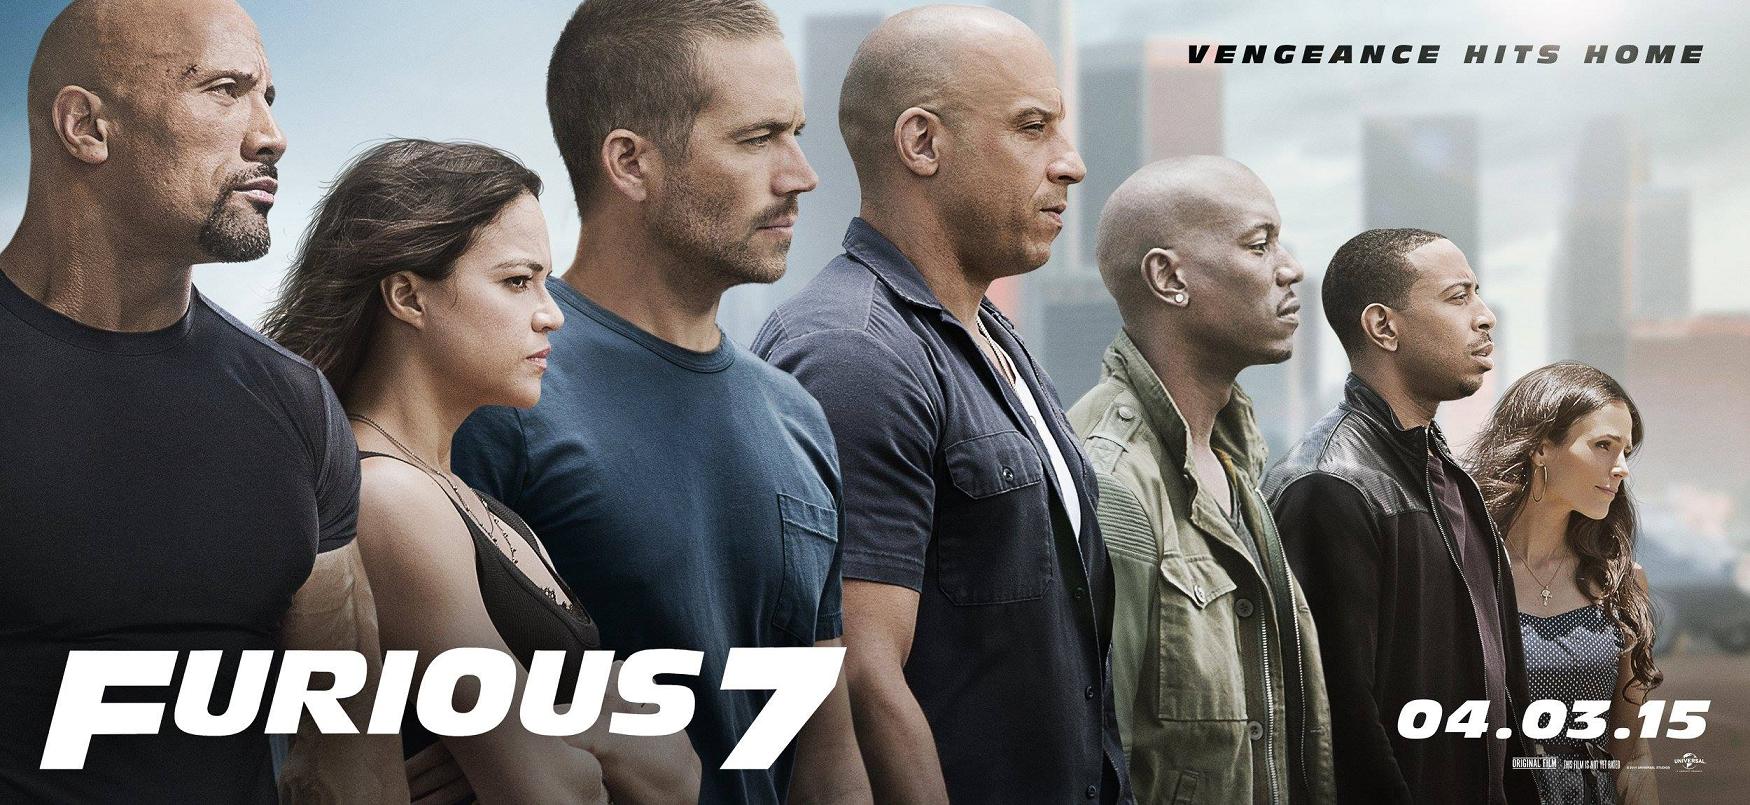 Fast-and-Furious-7-Pic